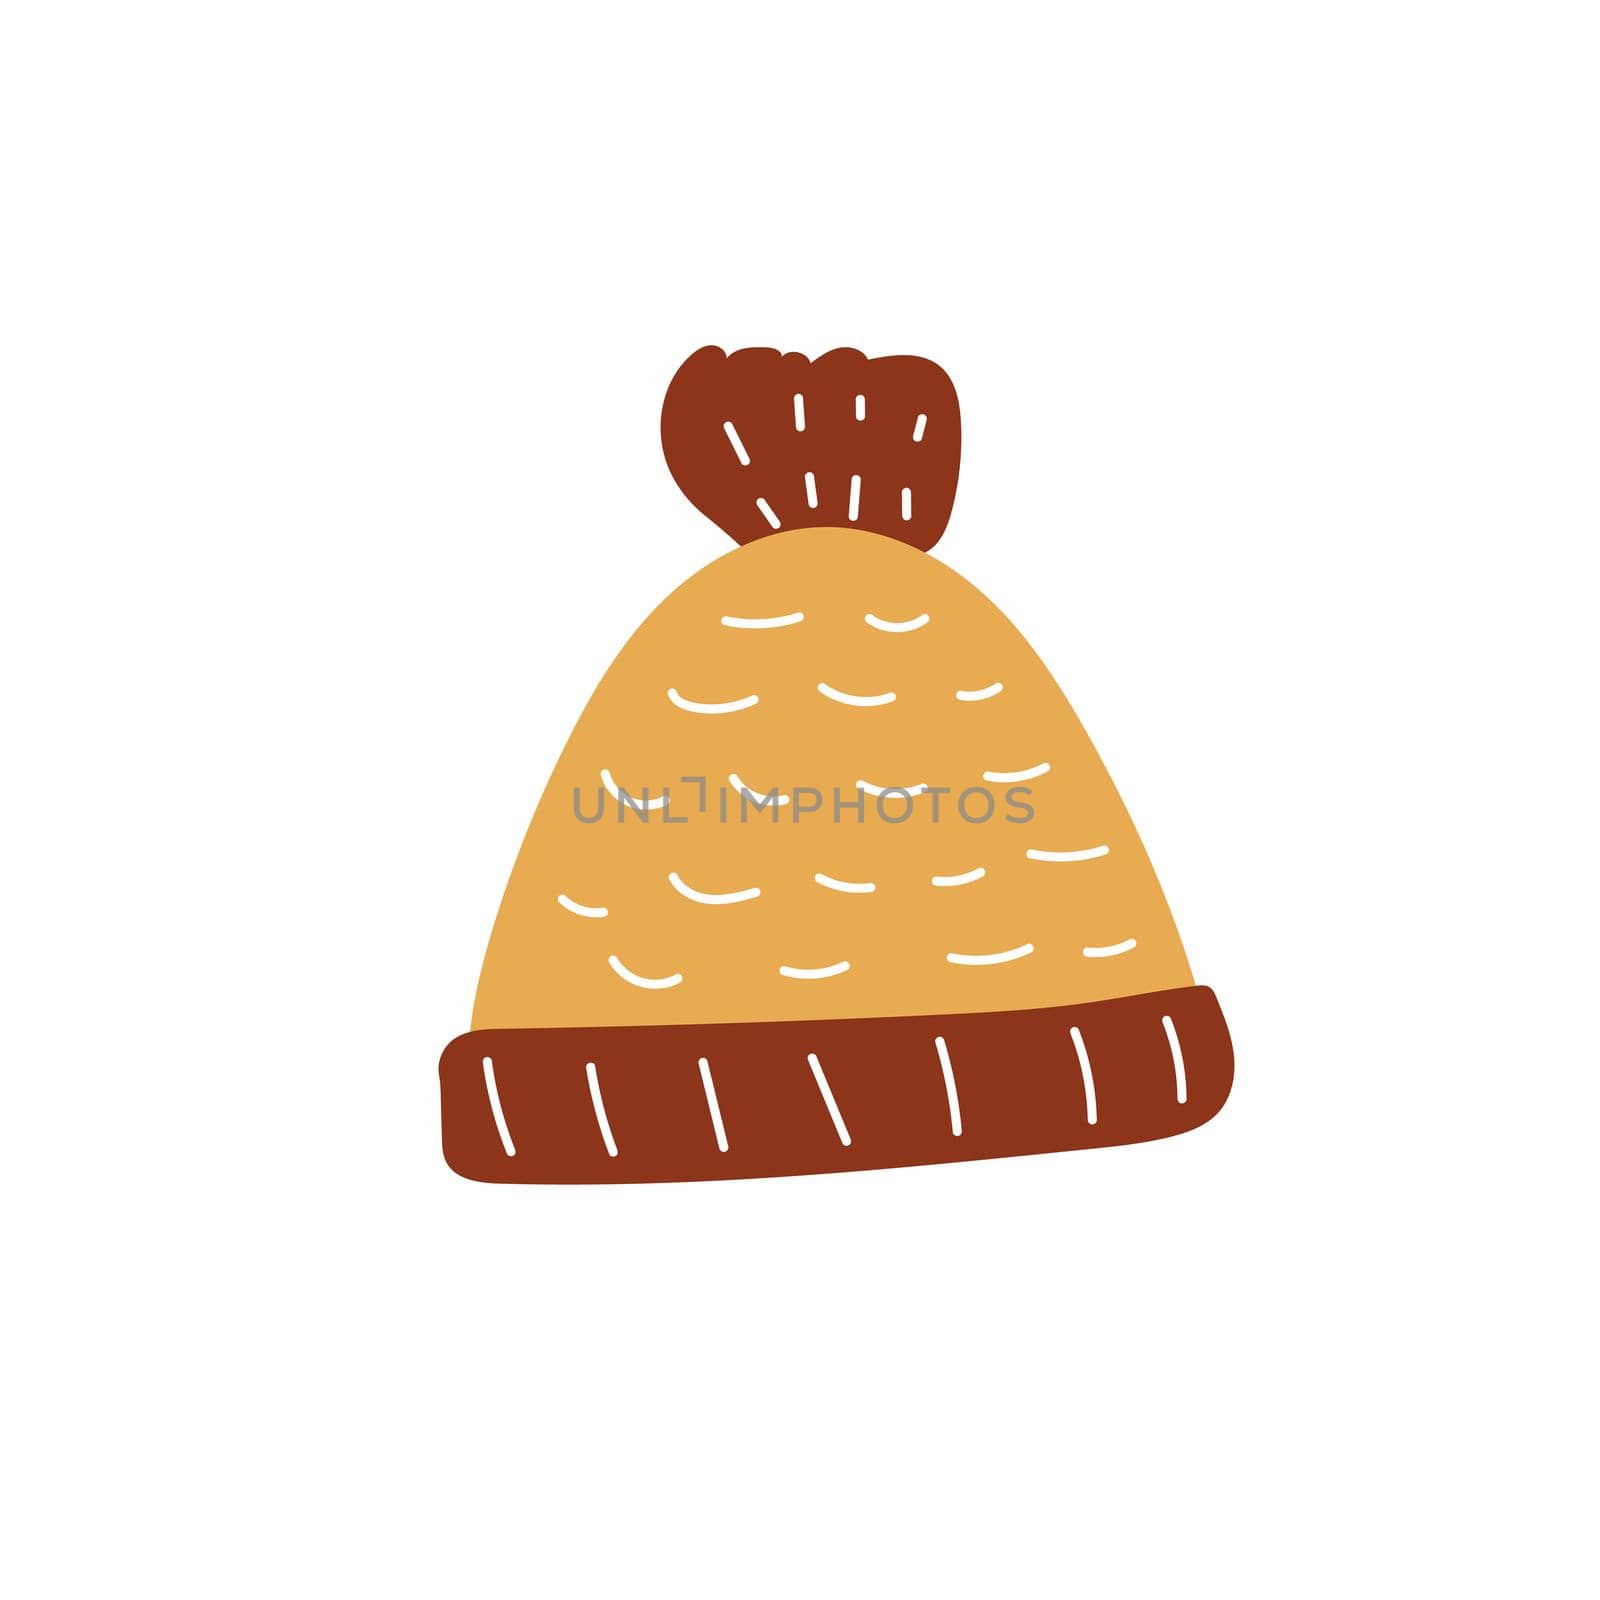 Knitted hat made of wool, vector illustration isolated on white background. Autumn hat icon